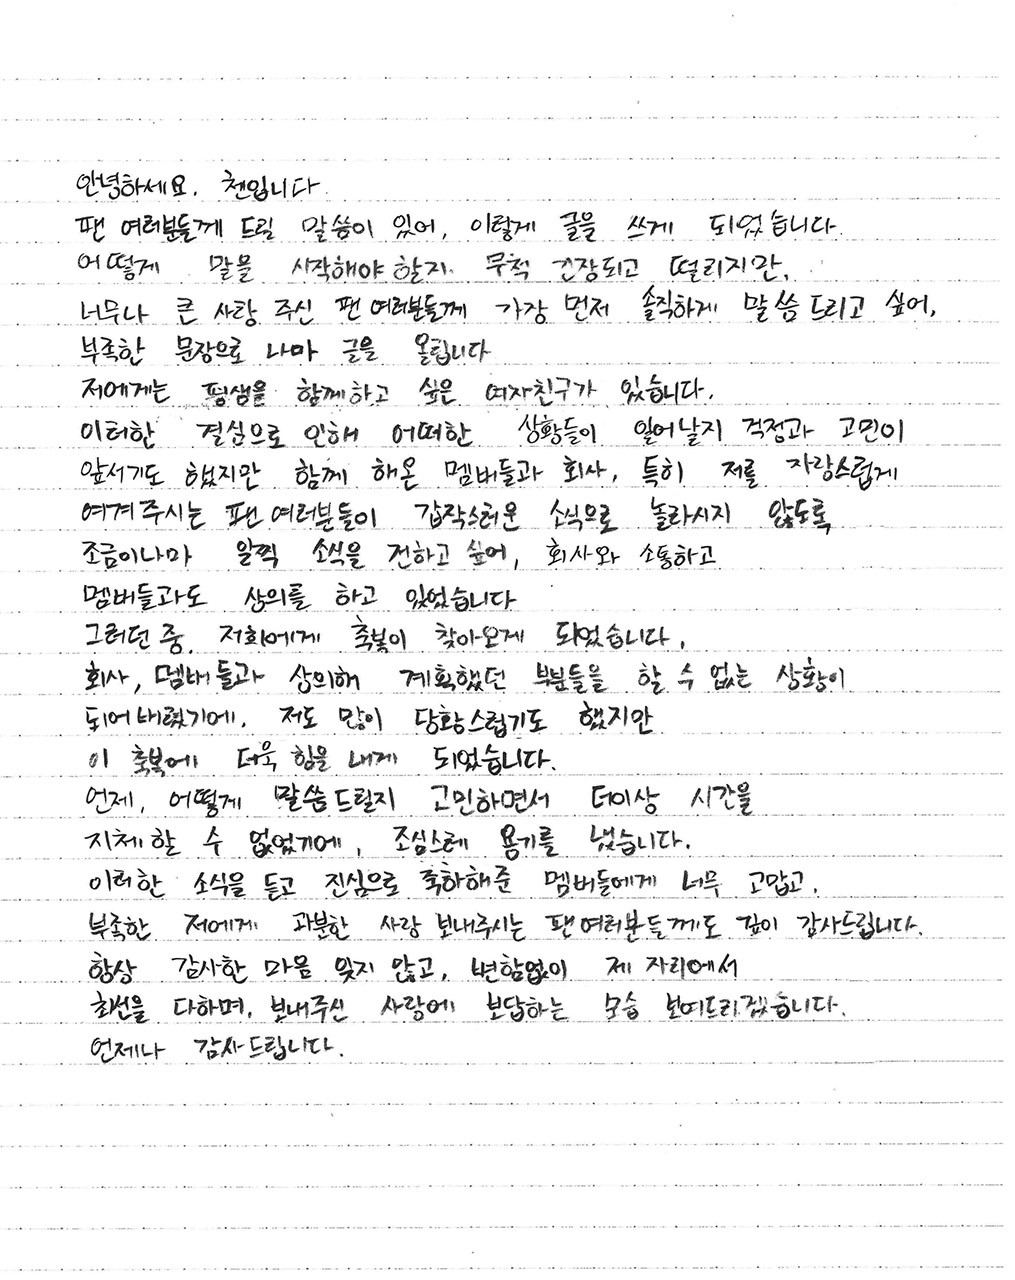 EXO Chen has announced the surprise marriage and pregnancy news.Chen posted a long hand letter to the official fan club community Lysn on the 13th and informed the marriage directly.Chen said, I am very nervous and nervous about how to start talking, but I wanted to be the first to tell the fans who have loved me so much. I have a girlfriend who wants to spend my life together.I was worried and worried about what kind of situation would happen due to this decision, but I wanted to communicate with the company a little early so that I would not be surprised by the sudden news, and I was talking with the members. Then we came to Blessing, which was very embarrassing, but it was more powerful for this Blessing, he said indirectly.Chen said, I was very brave because I could not delay the time anymore. I am very grateful to the members who have sincerely congratulated me on hearing this news and I am deeply grateful to the fans who have sent me a love for me.Finally, Chen concluded the letter, I will always show you my gratitude and my gratitude for the love that I have always done my best in my place.After Chens letter was released, SM Entertainment, a subsidiary company, confirmed Chens marriage, saying, Chen met a precious relationship and marriage.The bride is a non-entertainer, and the marriage ceremony is planned to be held reverently by only the families of both families.According to the familys will, everything related to marriage and marriage is conducted privately. SM said, Chun will continue to work hard as The Artist, he said. I would like to ask Chen to celebrate with a lot of bessing.Chen is the first member of EXO to be married to the world, and has been interested not only in Korea but also overseas in the sudden marriage announcement of the top idol.EXO fans responded to Chens marriage and pregnancy announcement astonishing, but they are soon giving the voice of Blessing to Chen.Chen did not hide the marriage fact, but he was the first to inform the fans directly.It is also why Chen, who started the second act of life in the Blessing of members and fans, is more expected to show up in the future.Meanwhile, Chen, born in 1992, made his debut as a group EXO in 2012.EXO left hits such as Run, Addiction, Monster and Love Shot, and Chen made his debut as a solo The Artist in April last year with We break up after April.Photo = DB